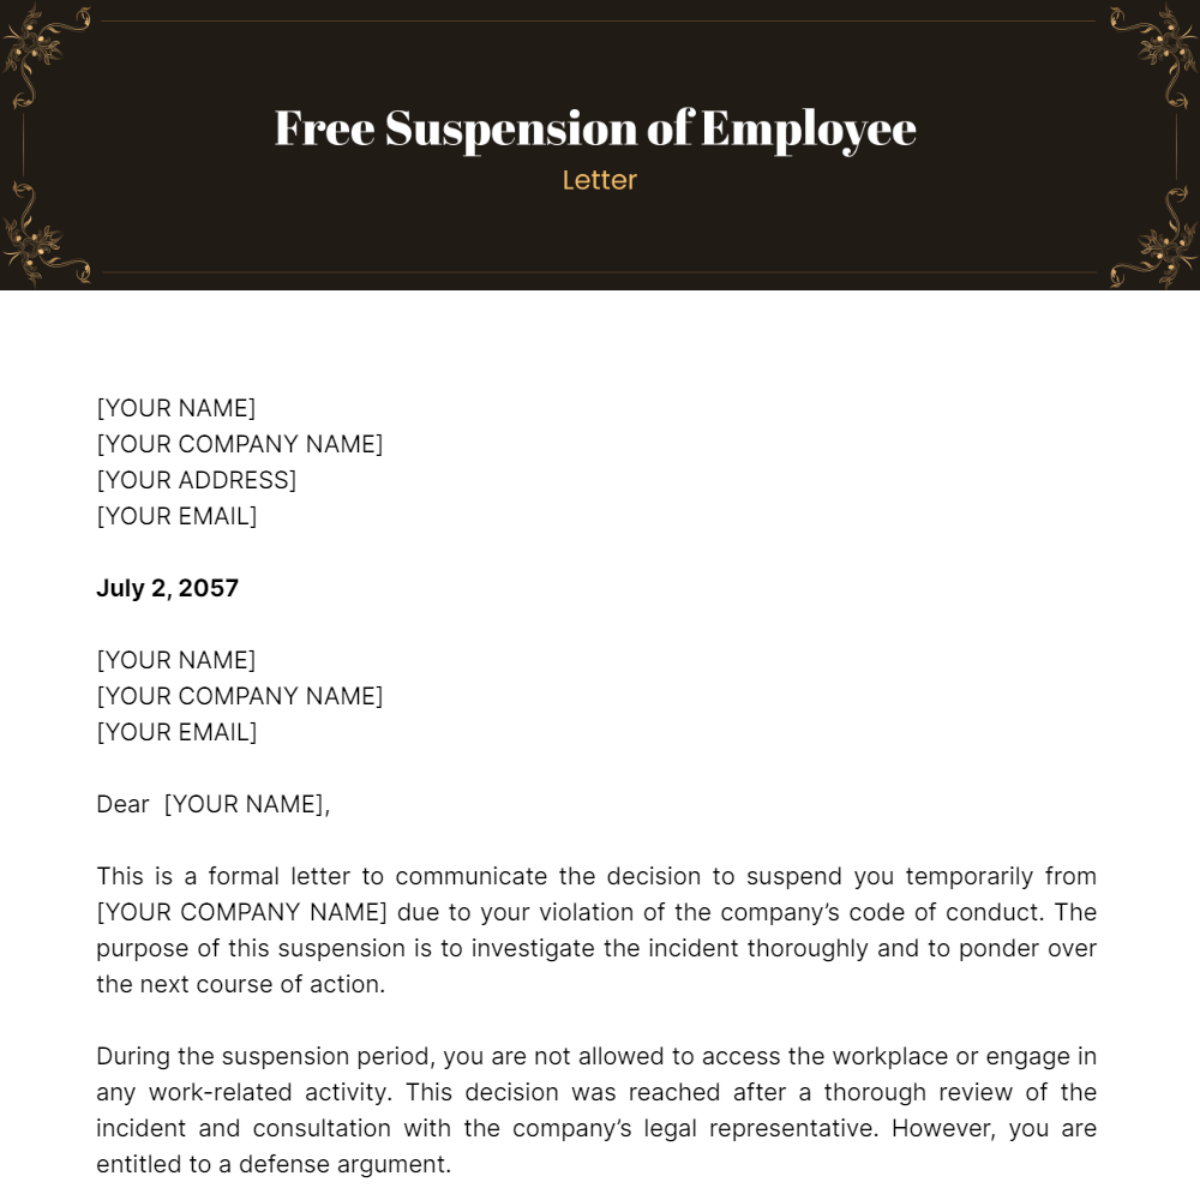 Suspension of Employee Letter Template